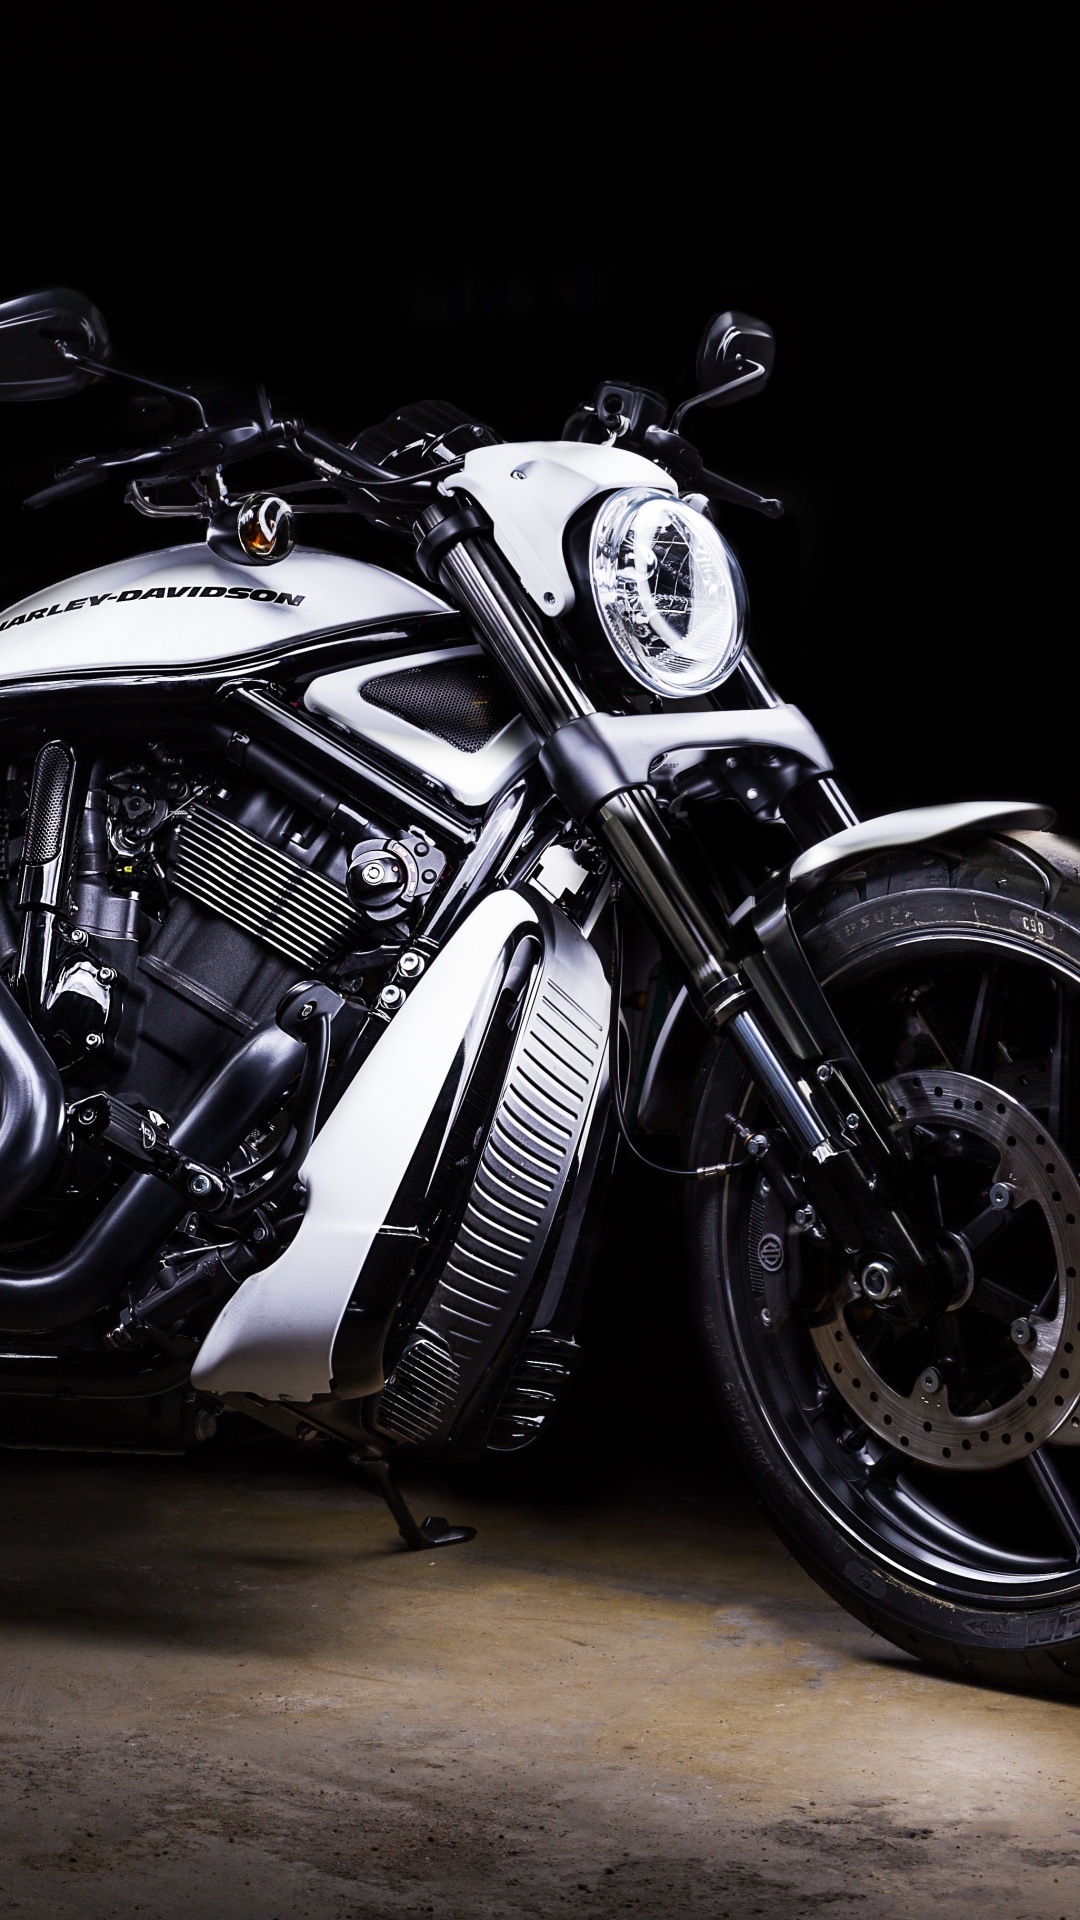 Black and Silver Cruiser Motorcycle. Wallpaper in 1080x1920 Resolution